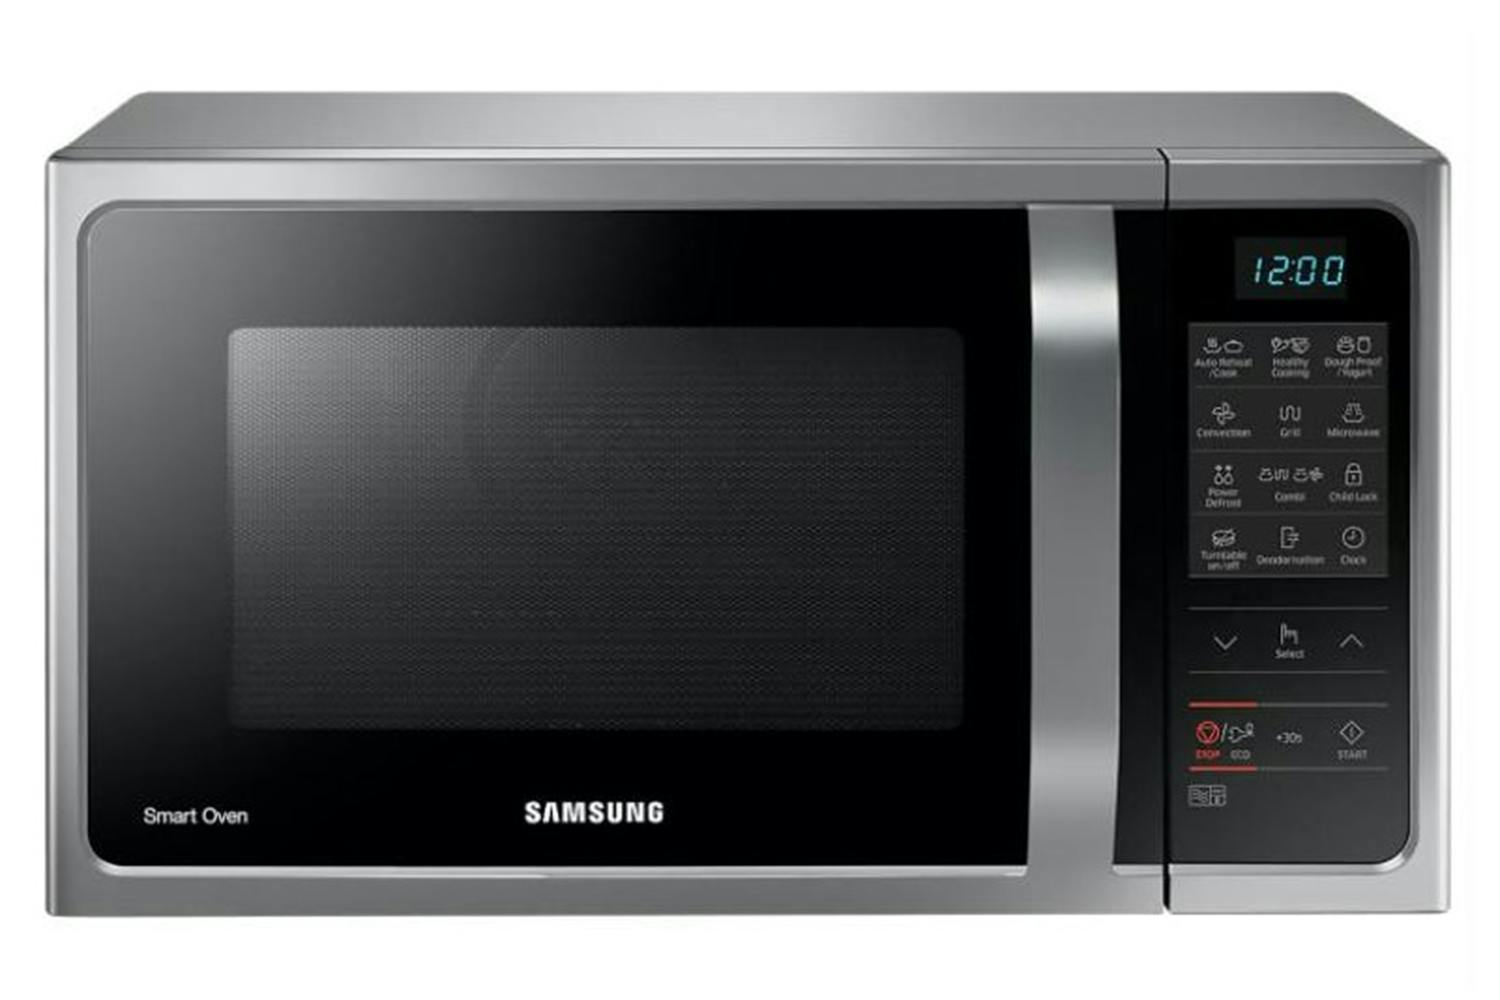 Samsung 900W 28 Litre Convection Microwave | MC28H5013AS/EU | Neo Stainless Silver